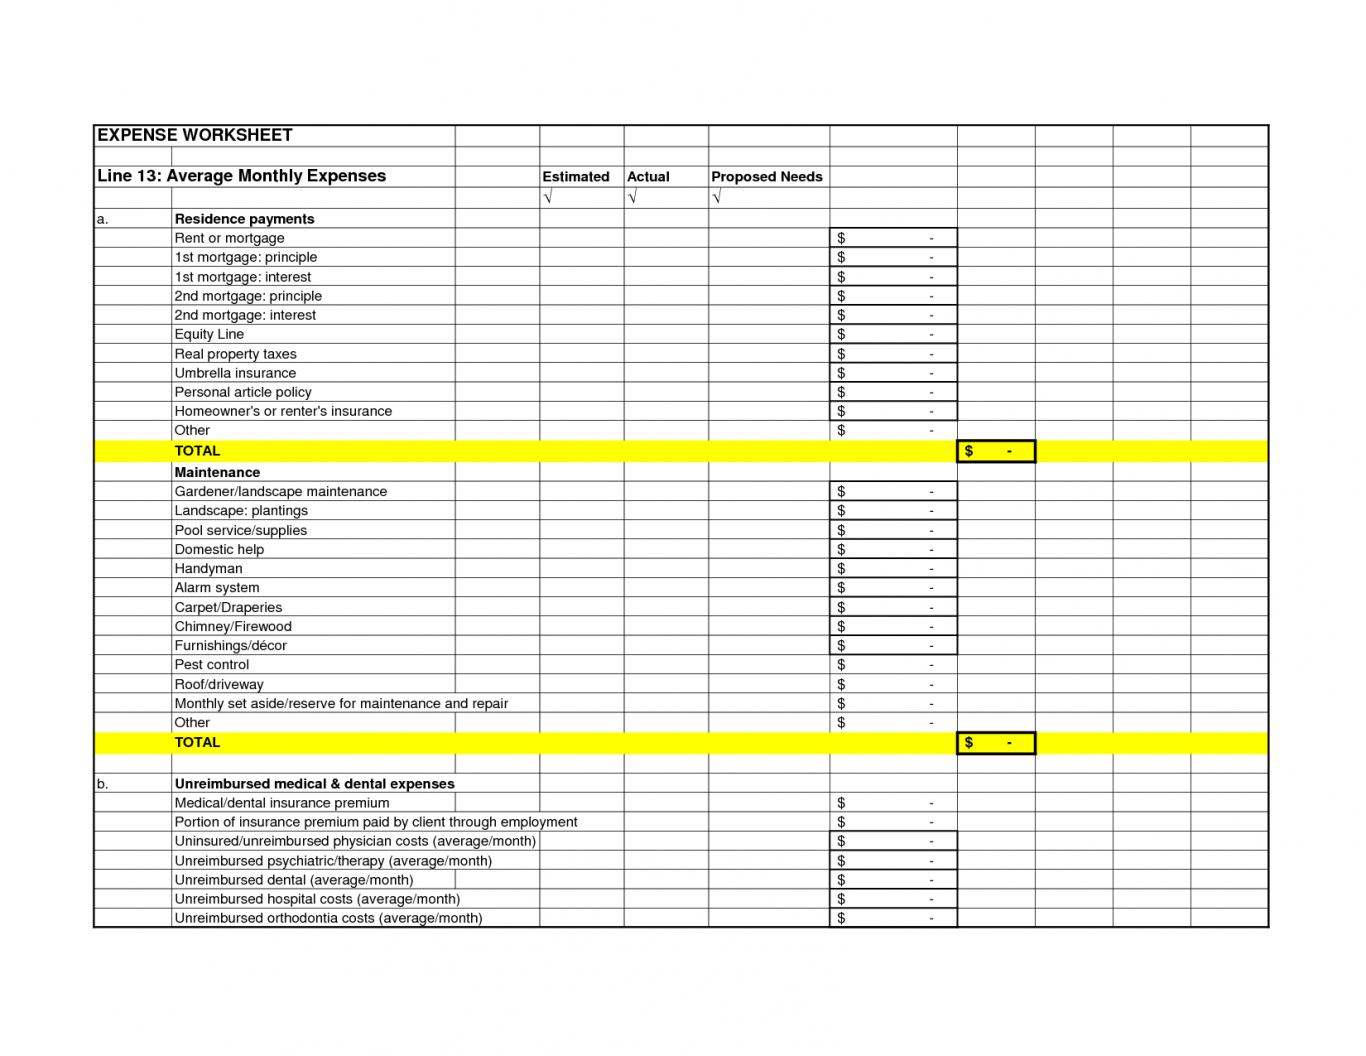 Business Averageudgeting And Expense Report Sheet Sample Spreadsheet within Business Expenses List Template